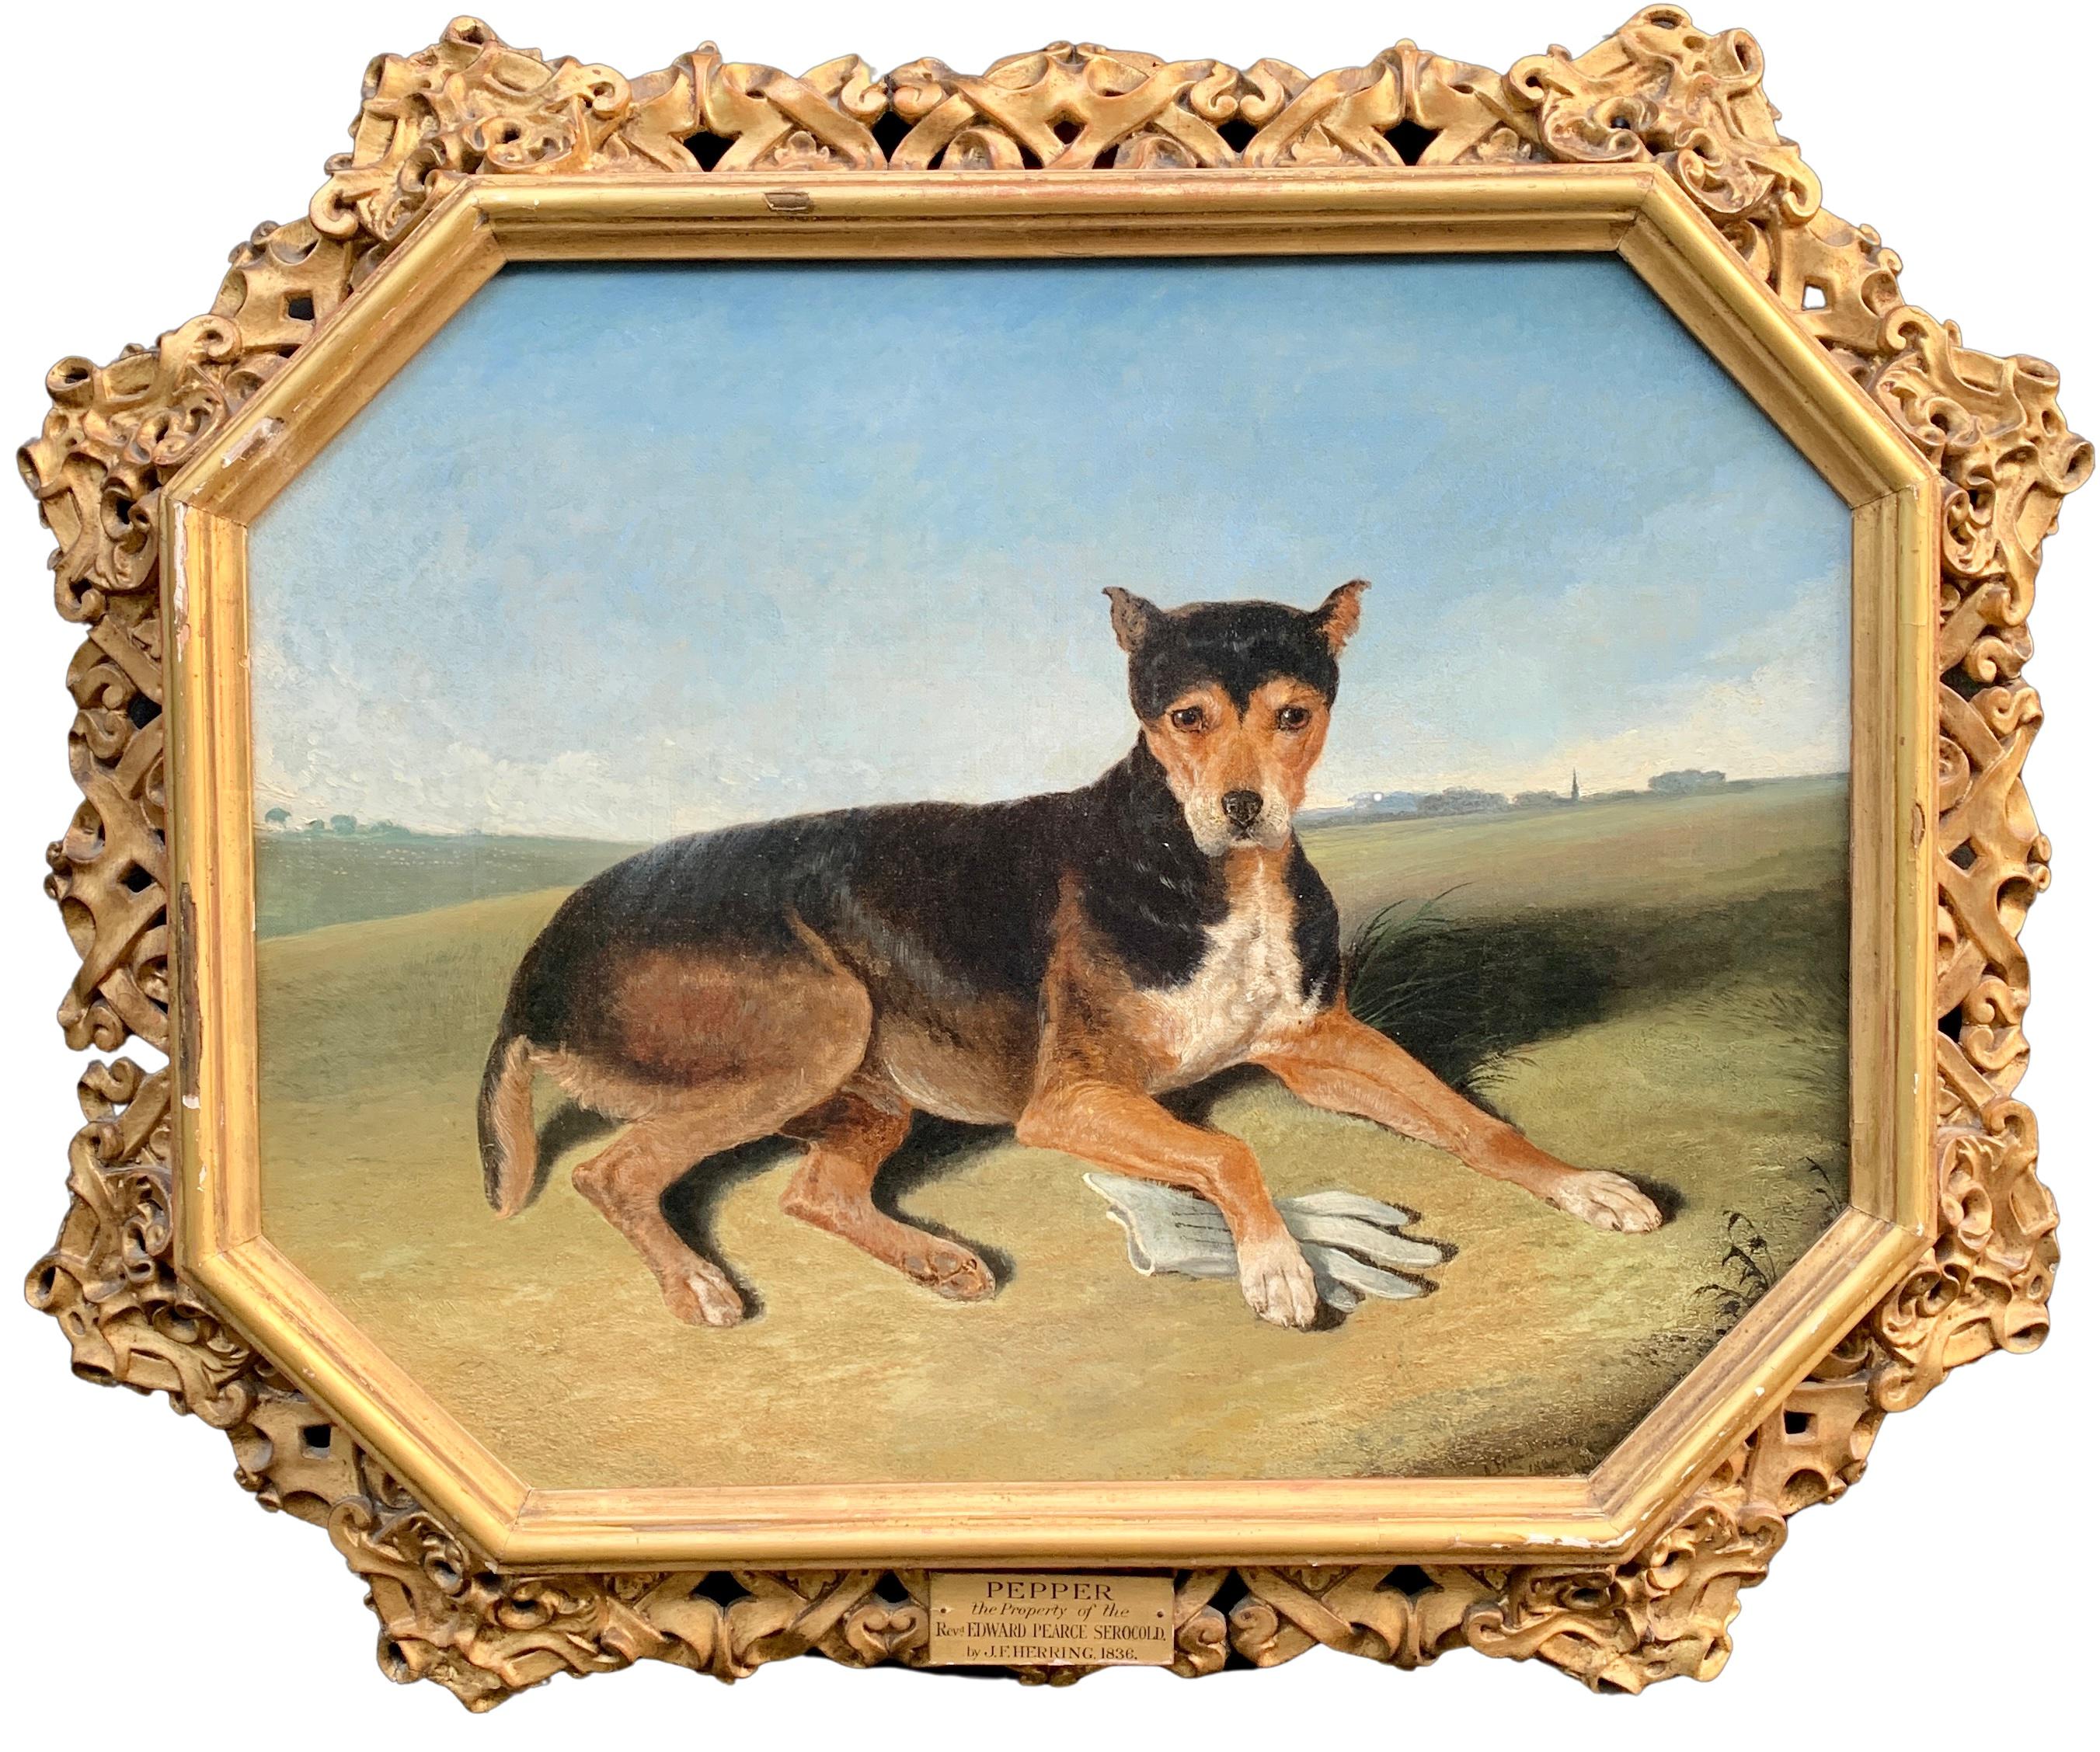 Antique 19th century portrait of a seated dog Pepper, in a landscape